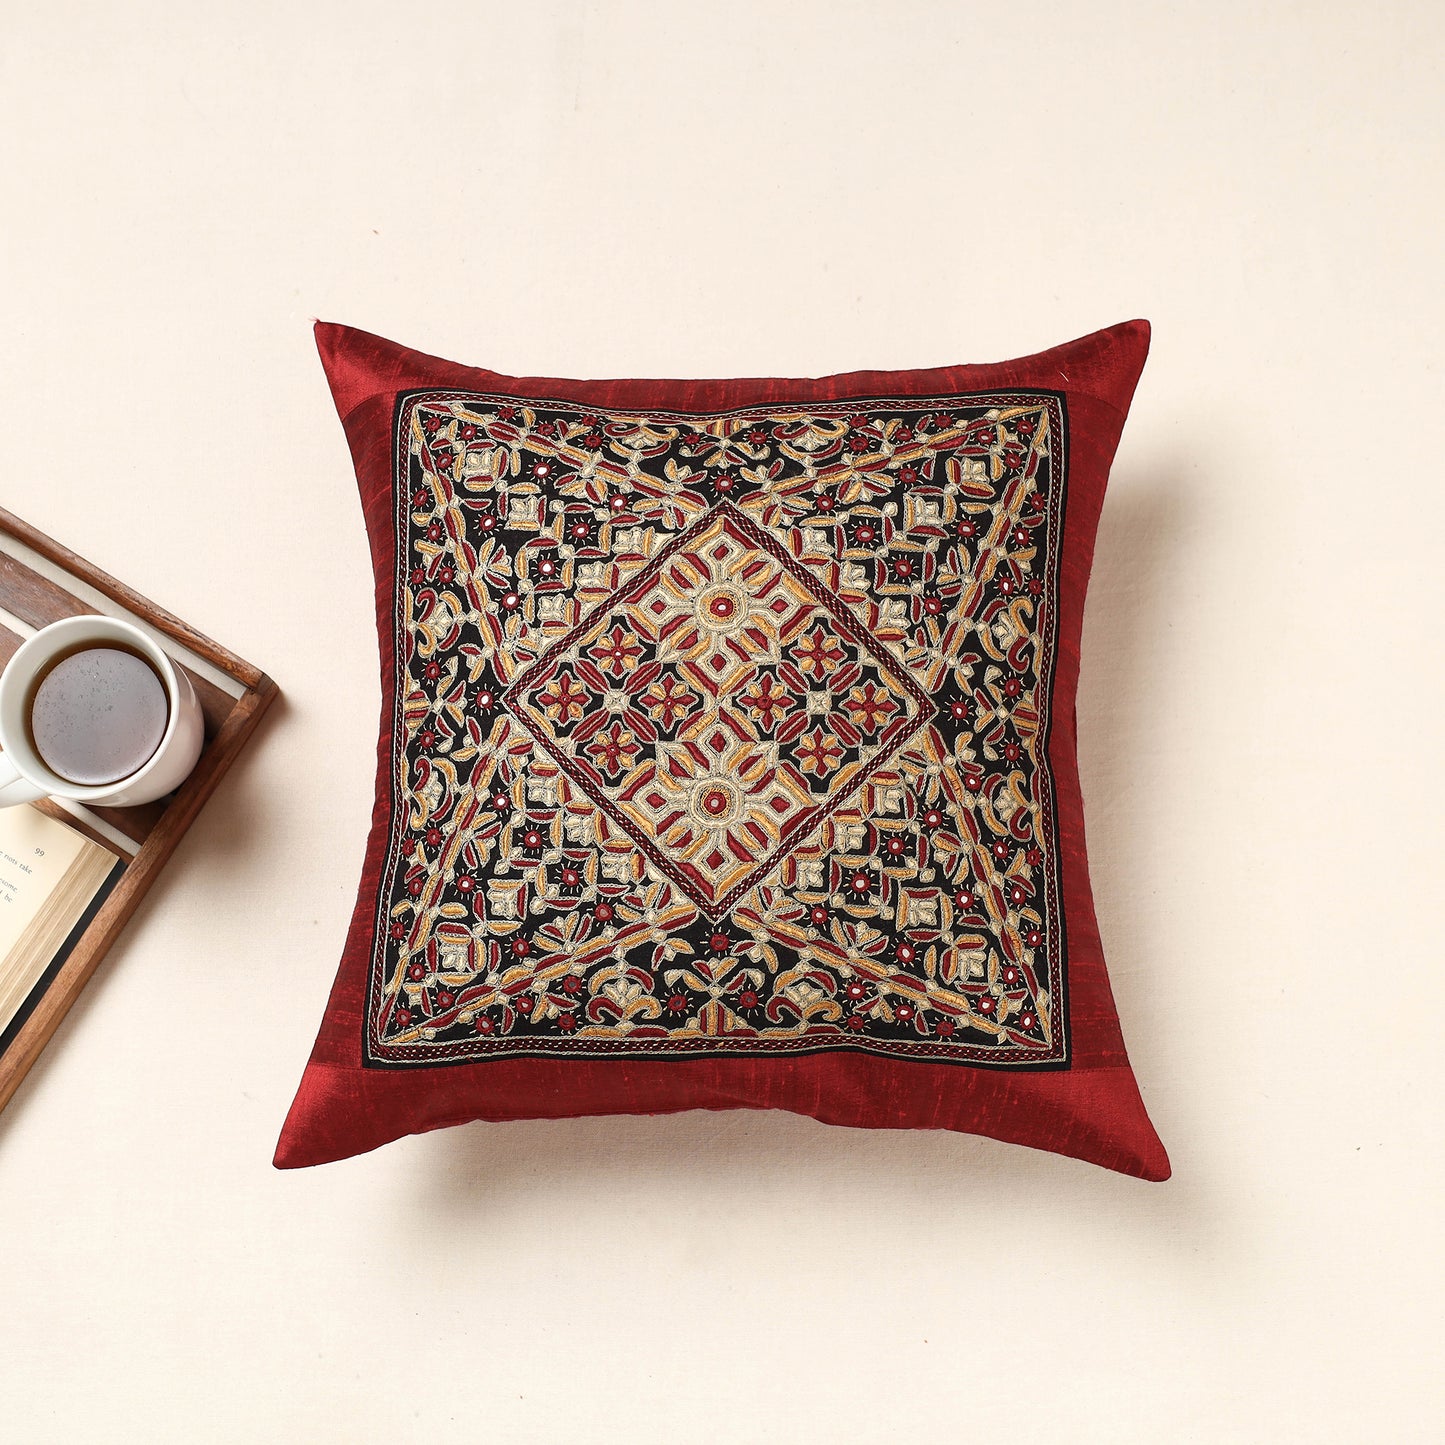 Red - Kutch Pakko Hand Embroidery Silk Cushion Cover (16 x 16 in)